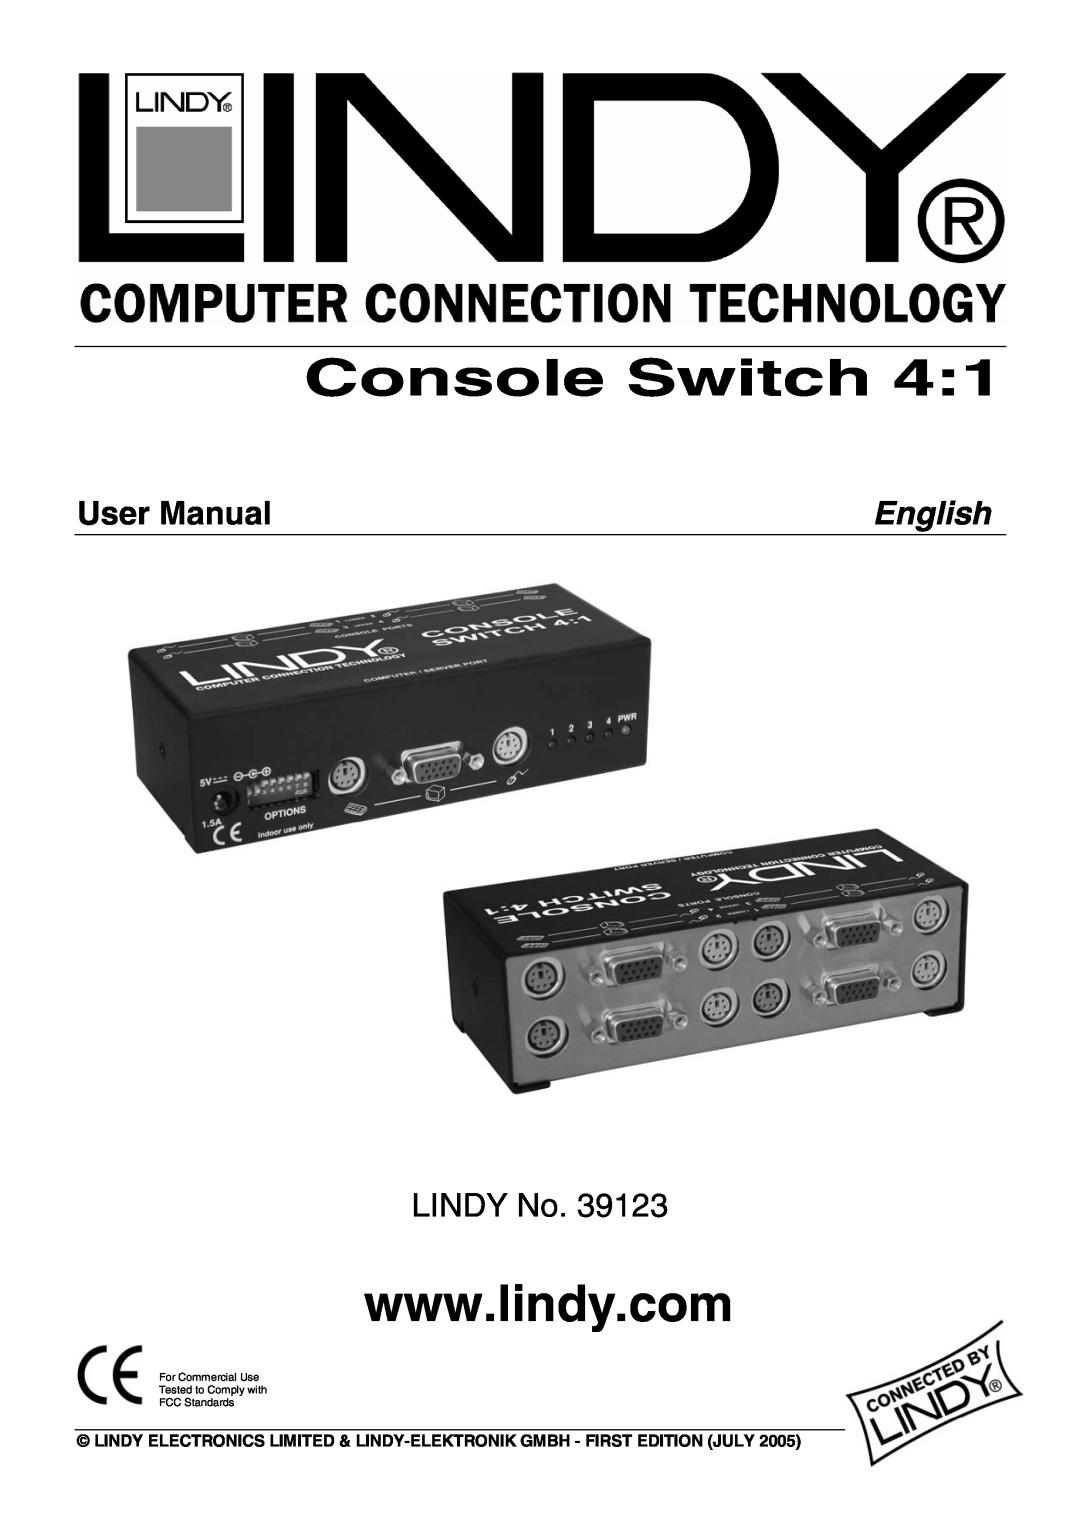 Lindy No. 39123 user manual User Manual, English, Console Switch, LINDY No 